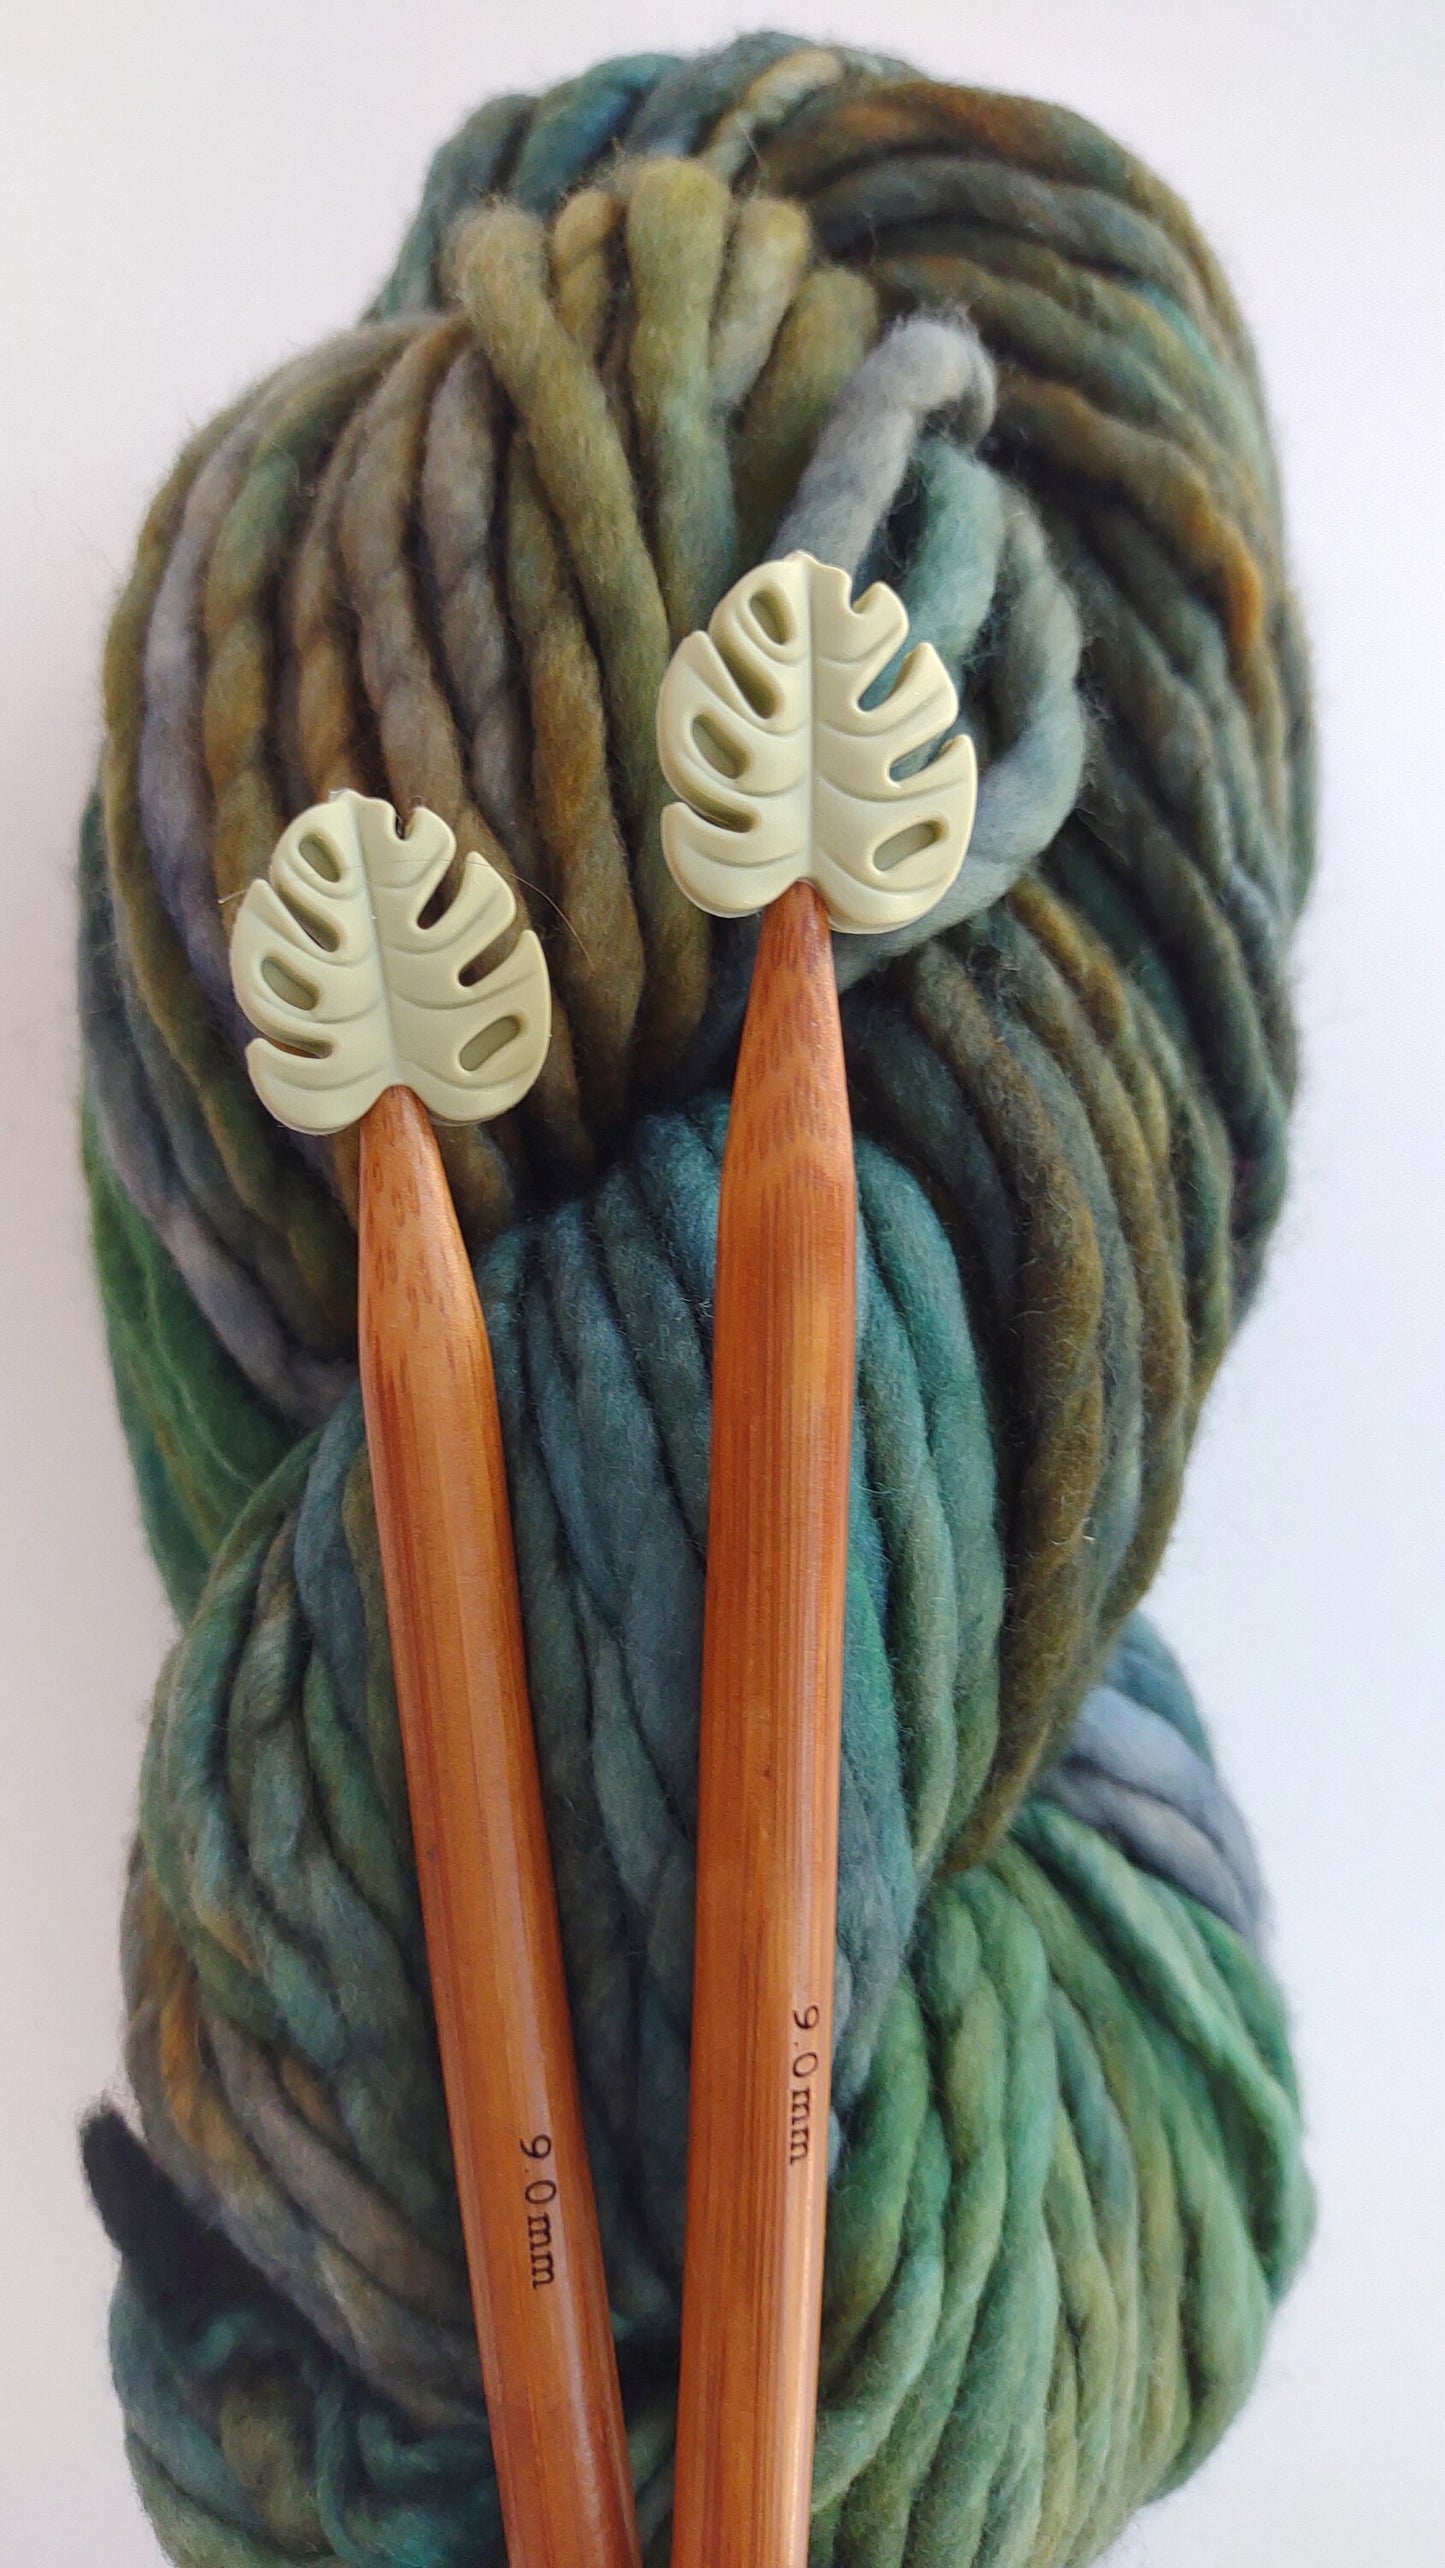 Sage Green Monstera Leaves Knitting Needle Protectors. Knitting Needle Stitch Stoppers. Notions, Accessories, Supplies, Tools. Light Green